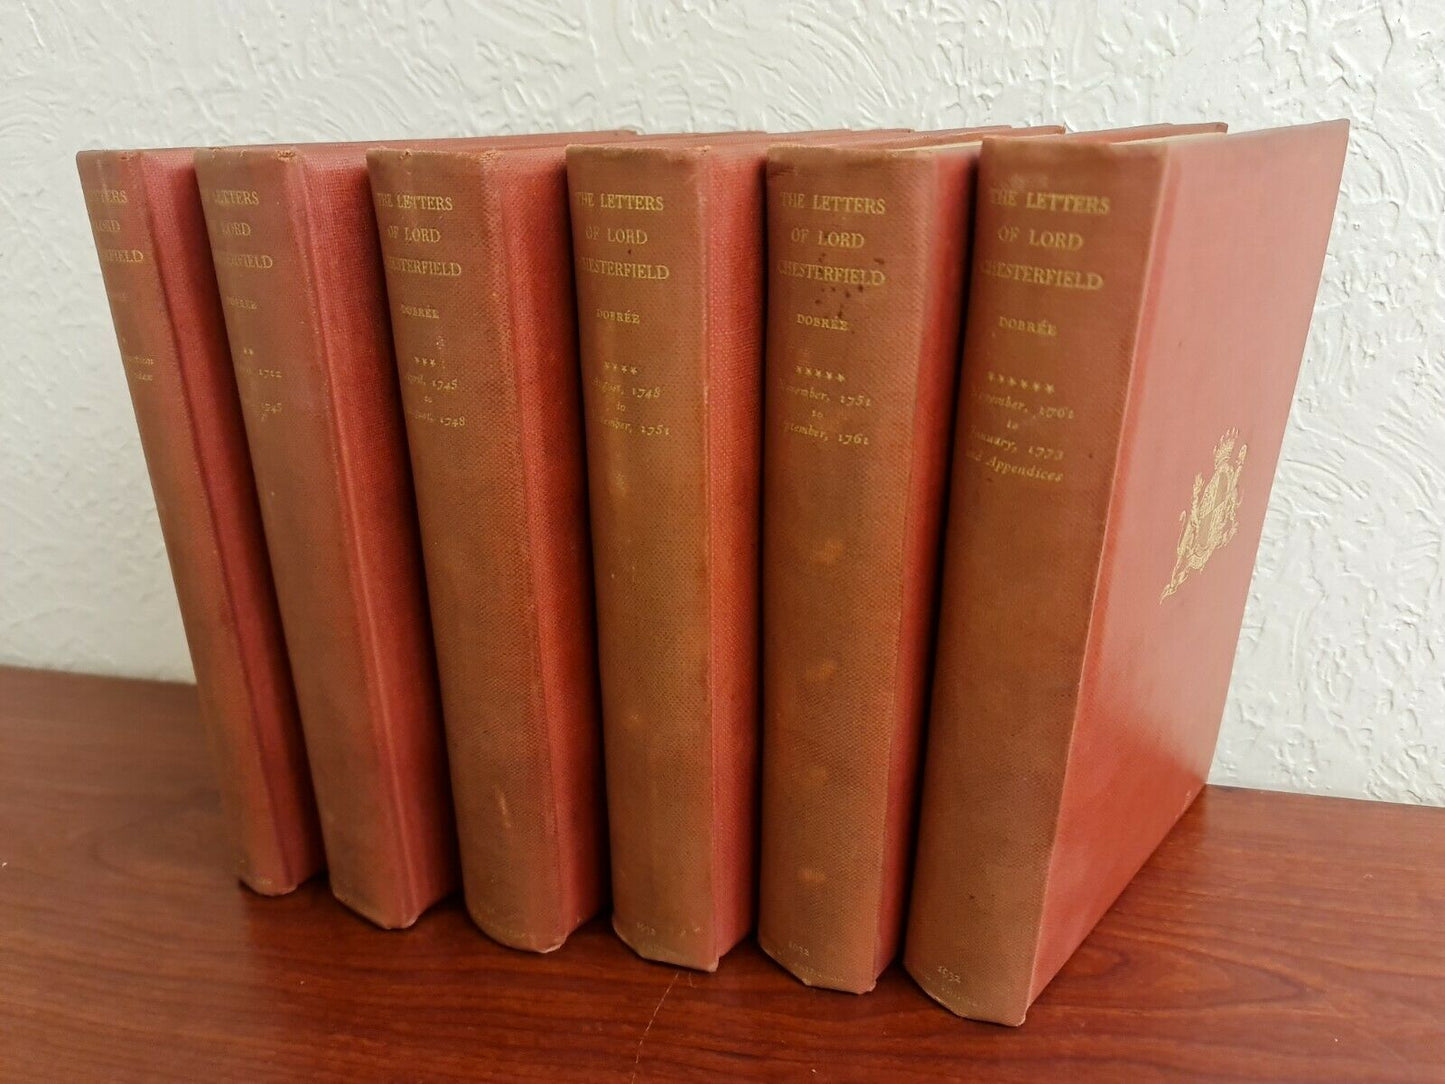 The Letters of Lord Chesterfield 6 Volume Set by B Dobree (1932)